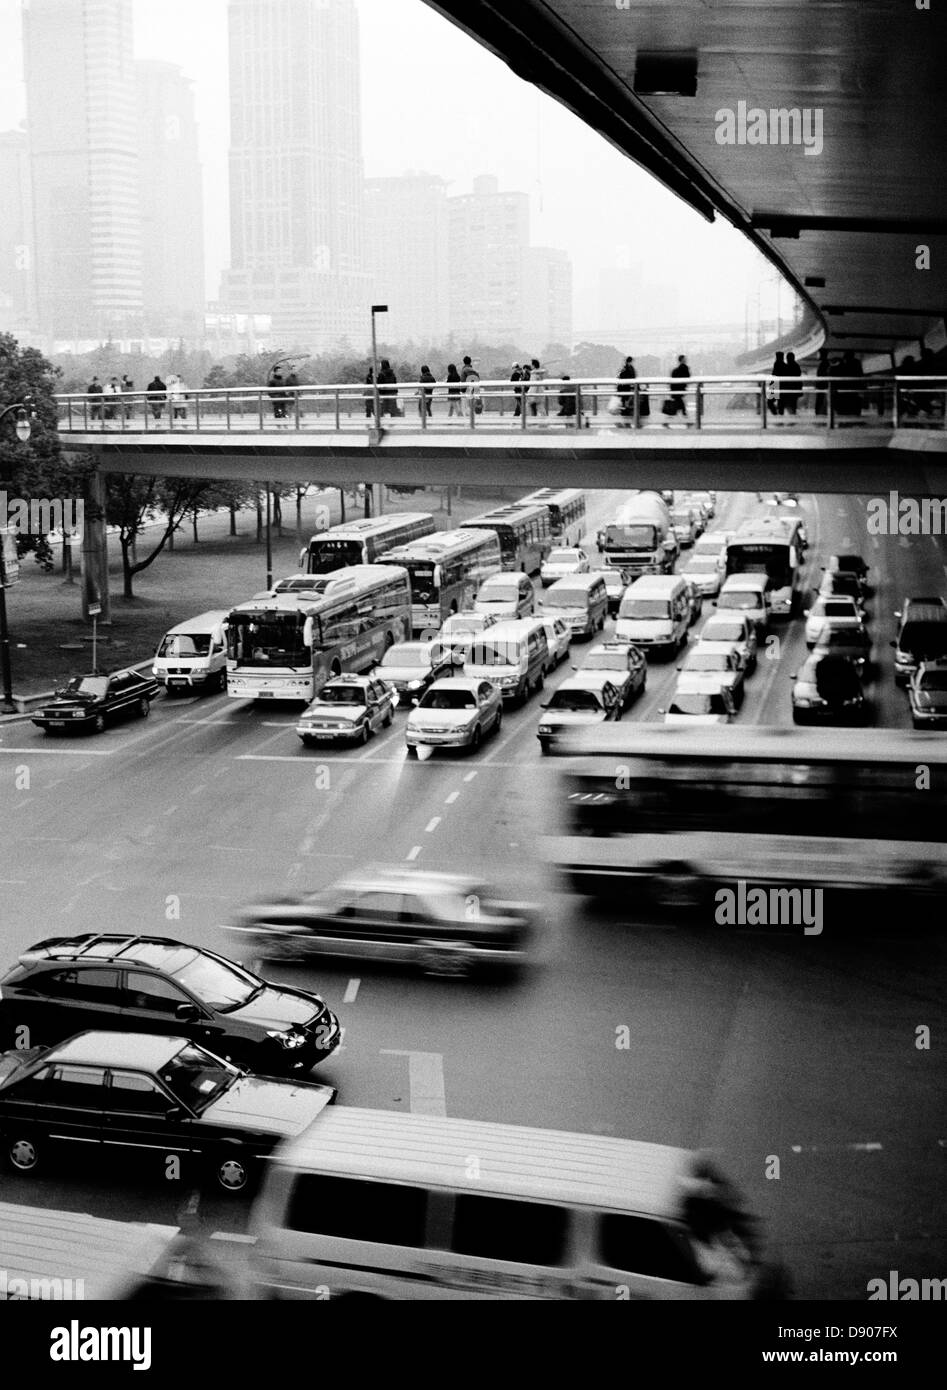 Traffic in a big city. Stock Photo